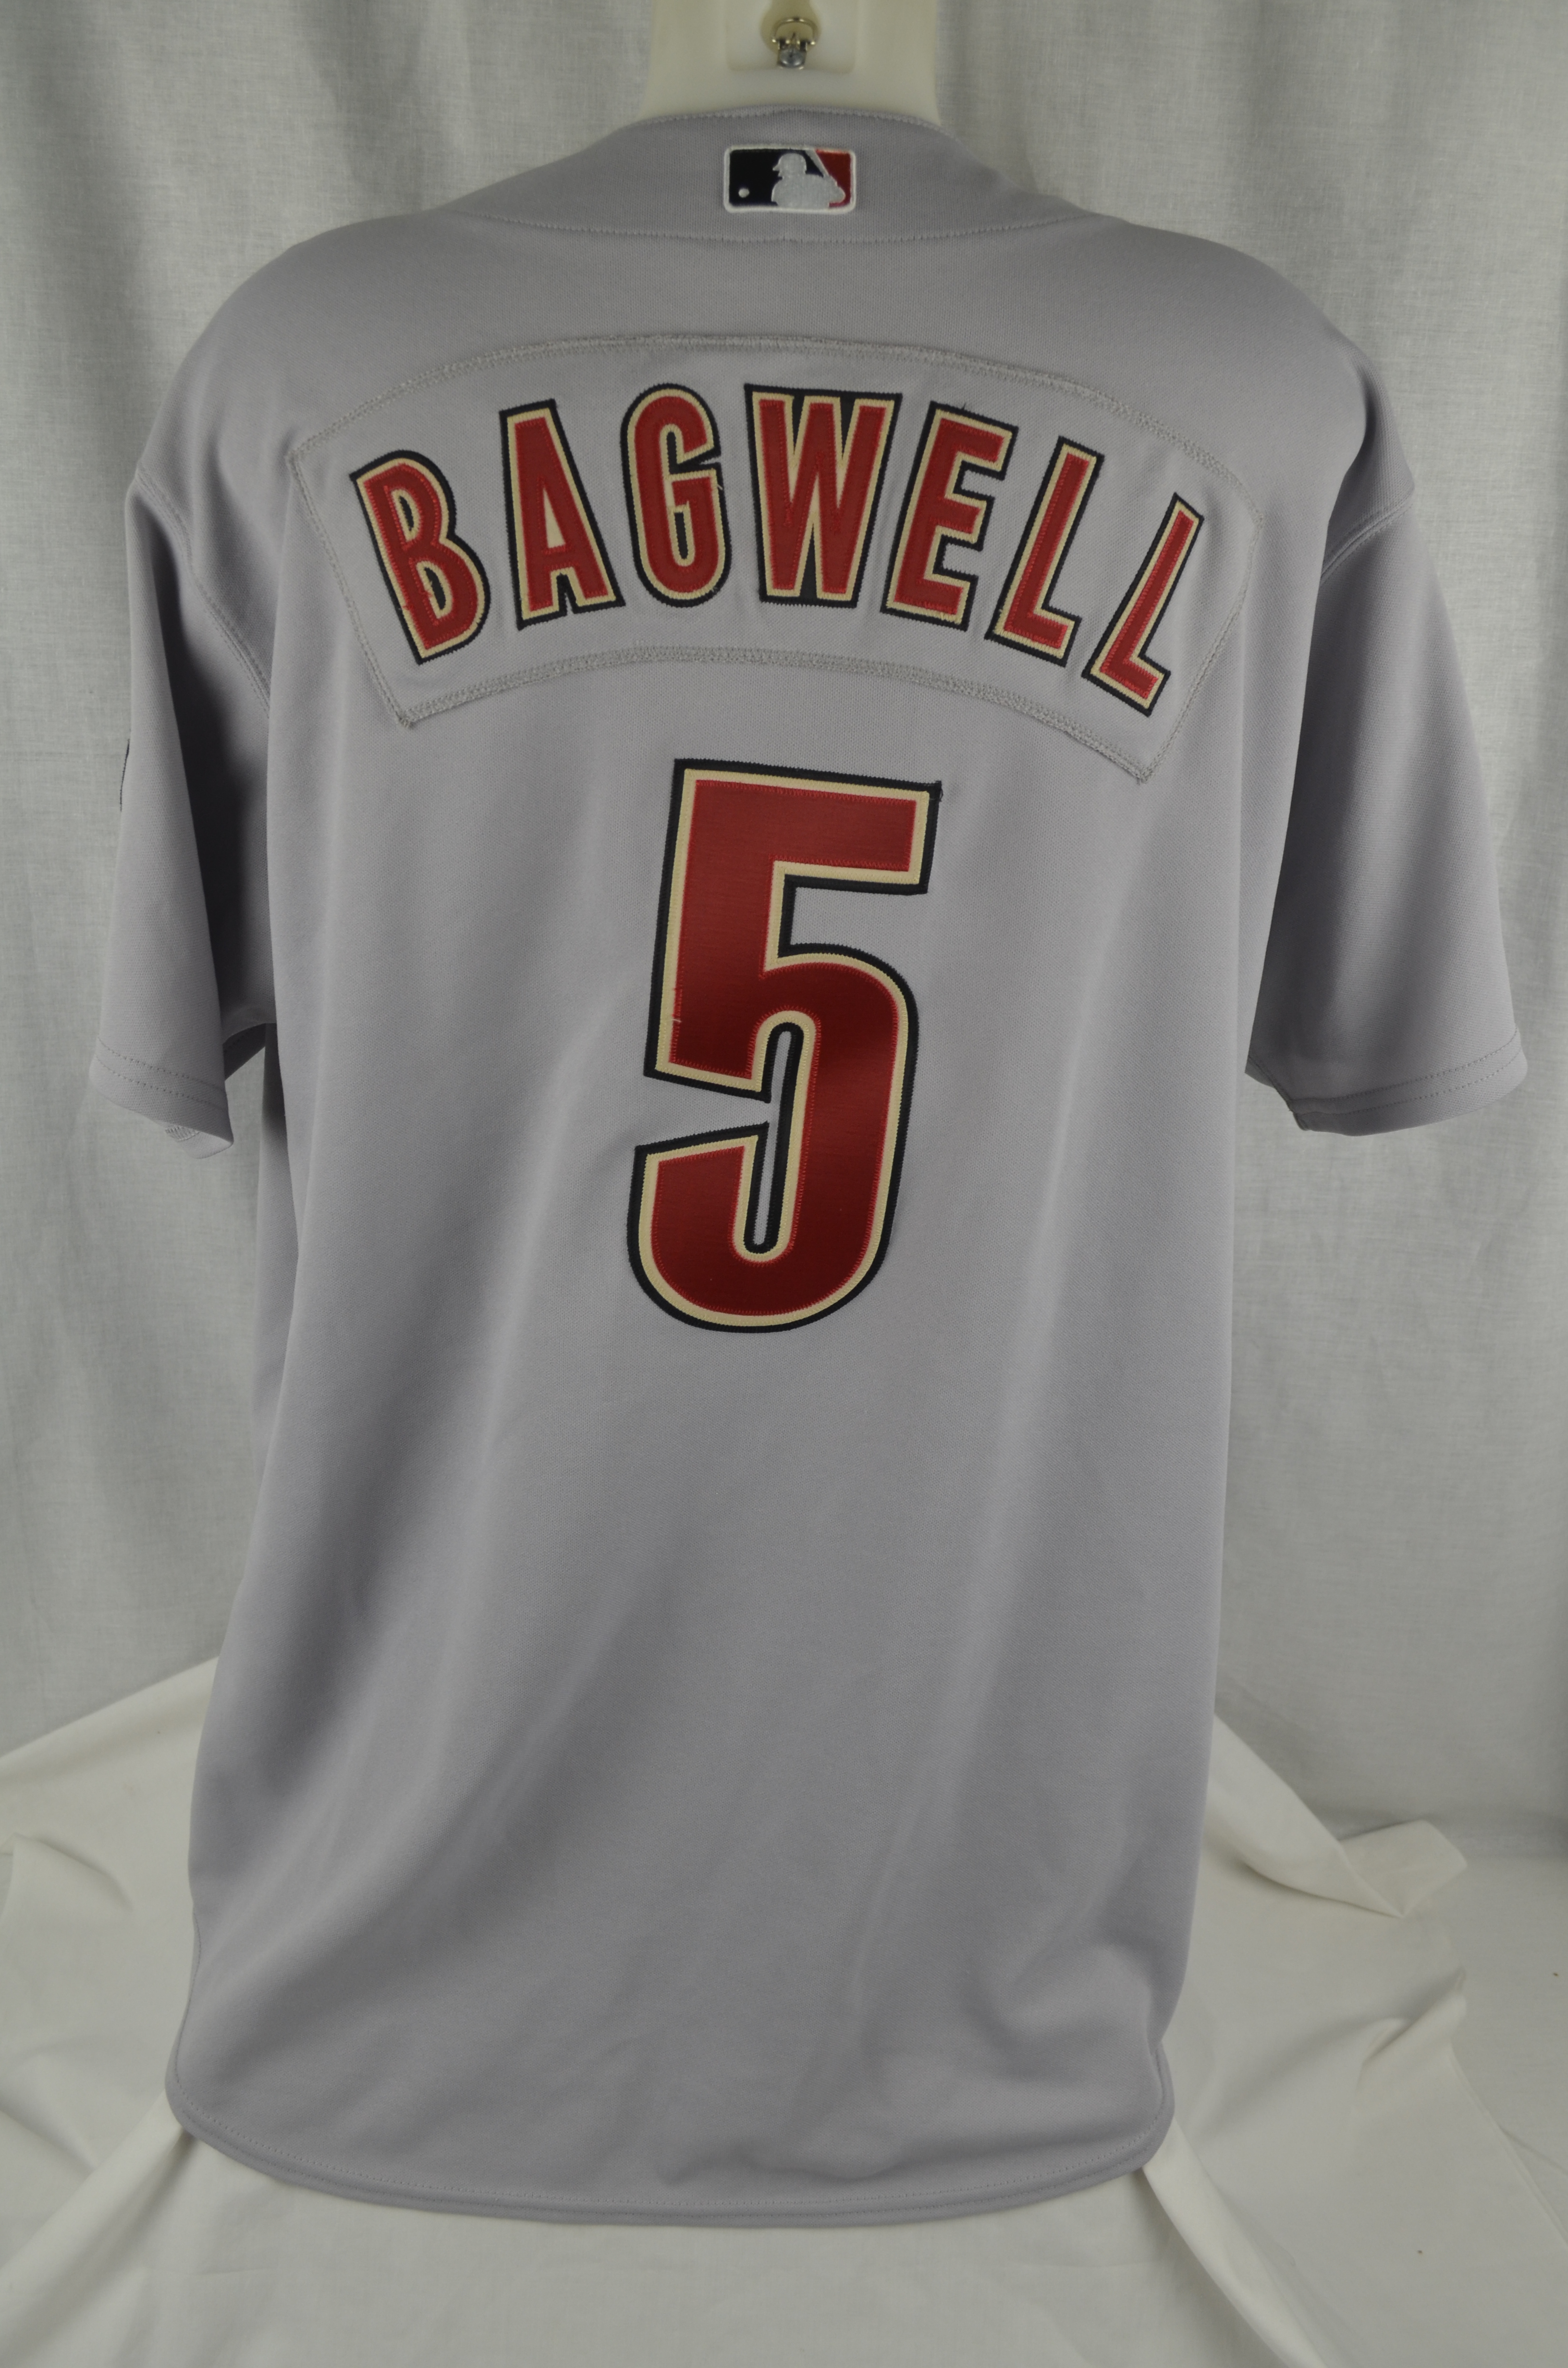 Jeff Bagwell Jersey, Authentic Astros Jeff Bagwell Jerseys & Uniform -  Astros Store